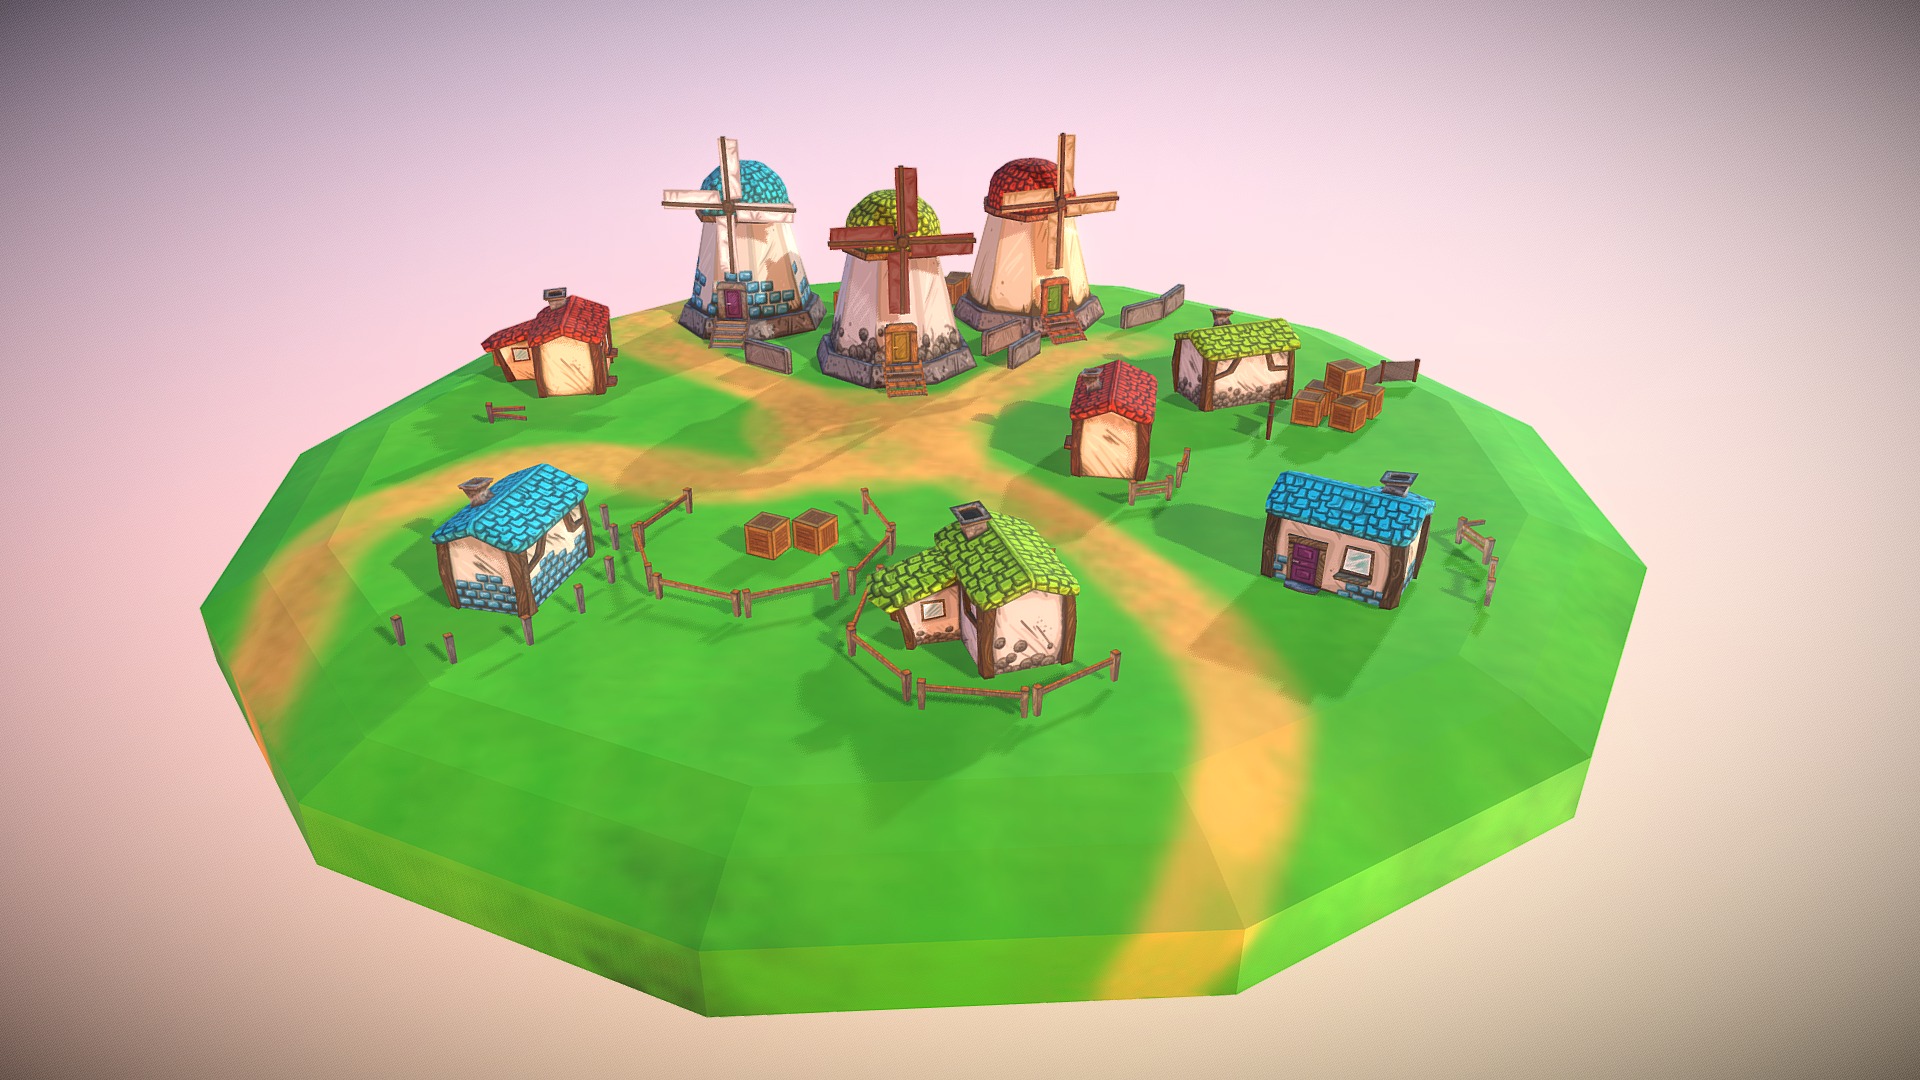 3D model Little Village - This is a 3D model of the Little Village. The 3D model is about a green and yellow circle with houses and trees.